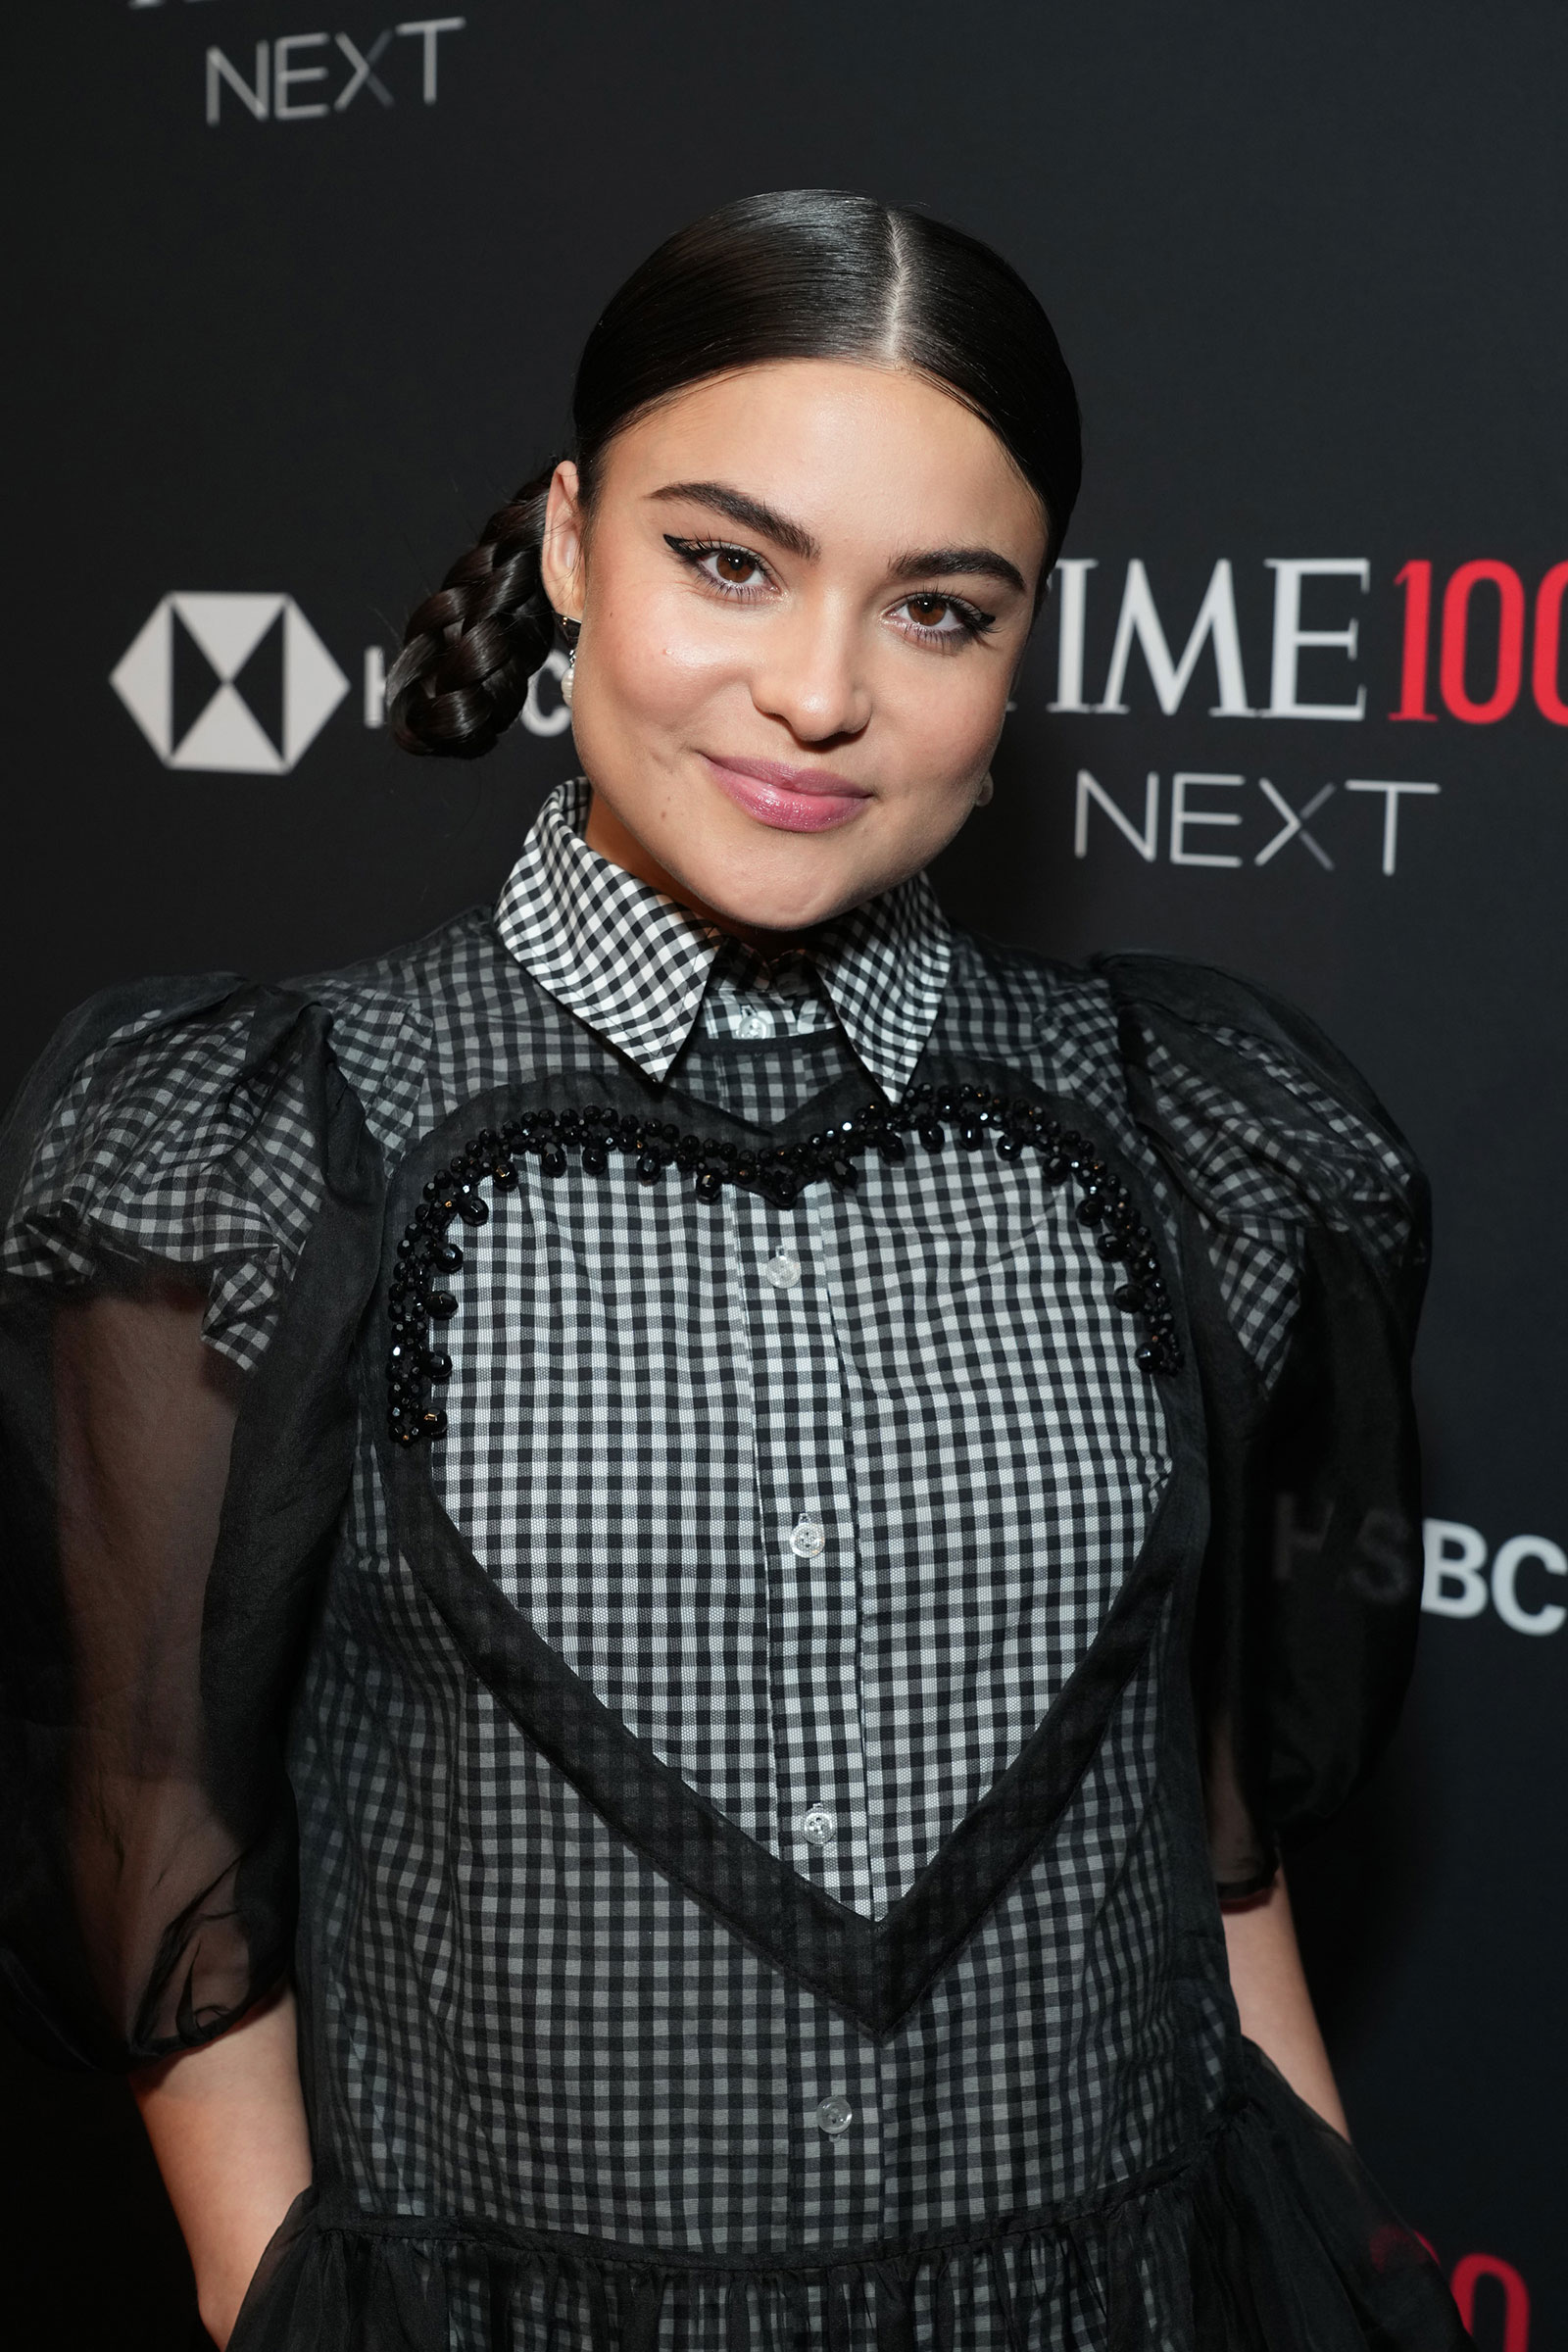 Actor Devery Jacobs attends the TIME100 Next Gala in New York City on Oct. 25, 2022. (Kevin Mazur—Getty Images for TIME)